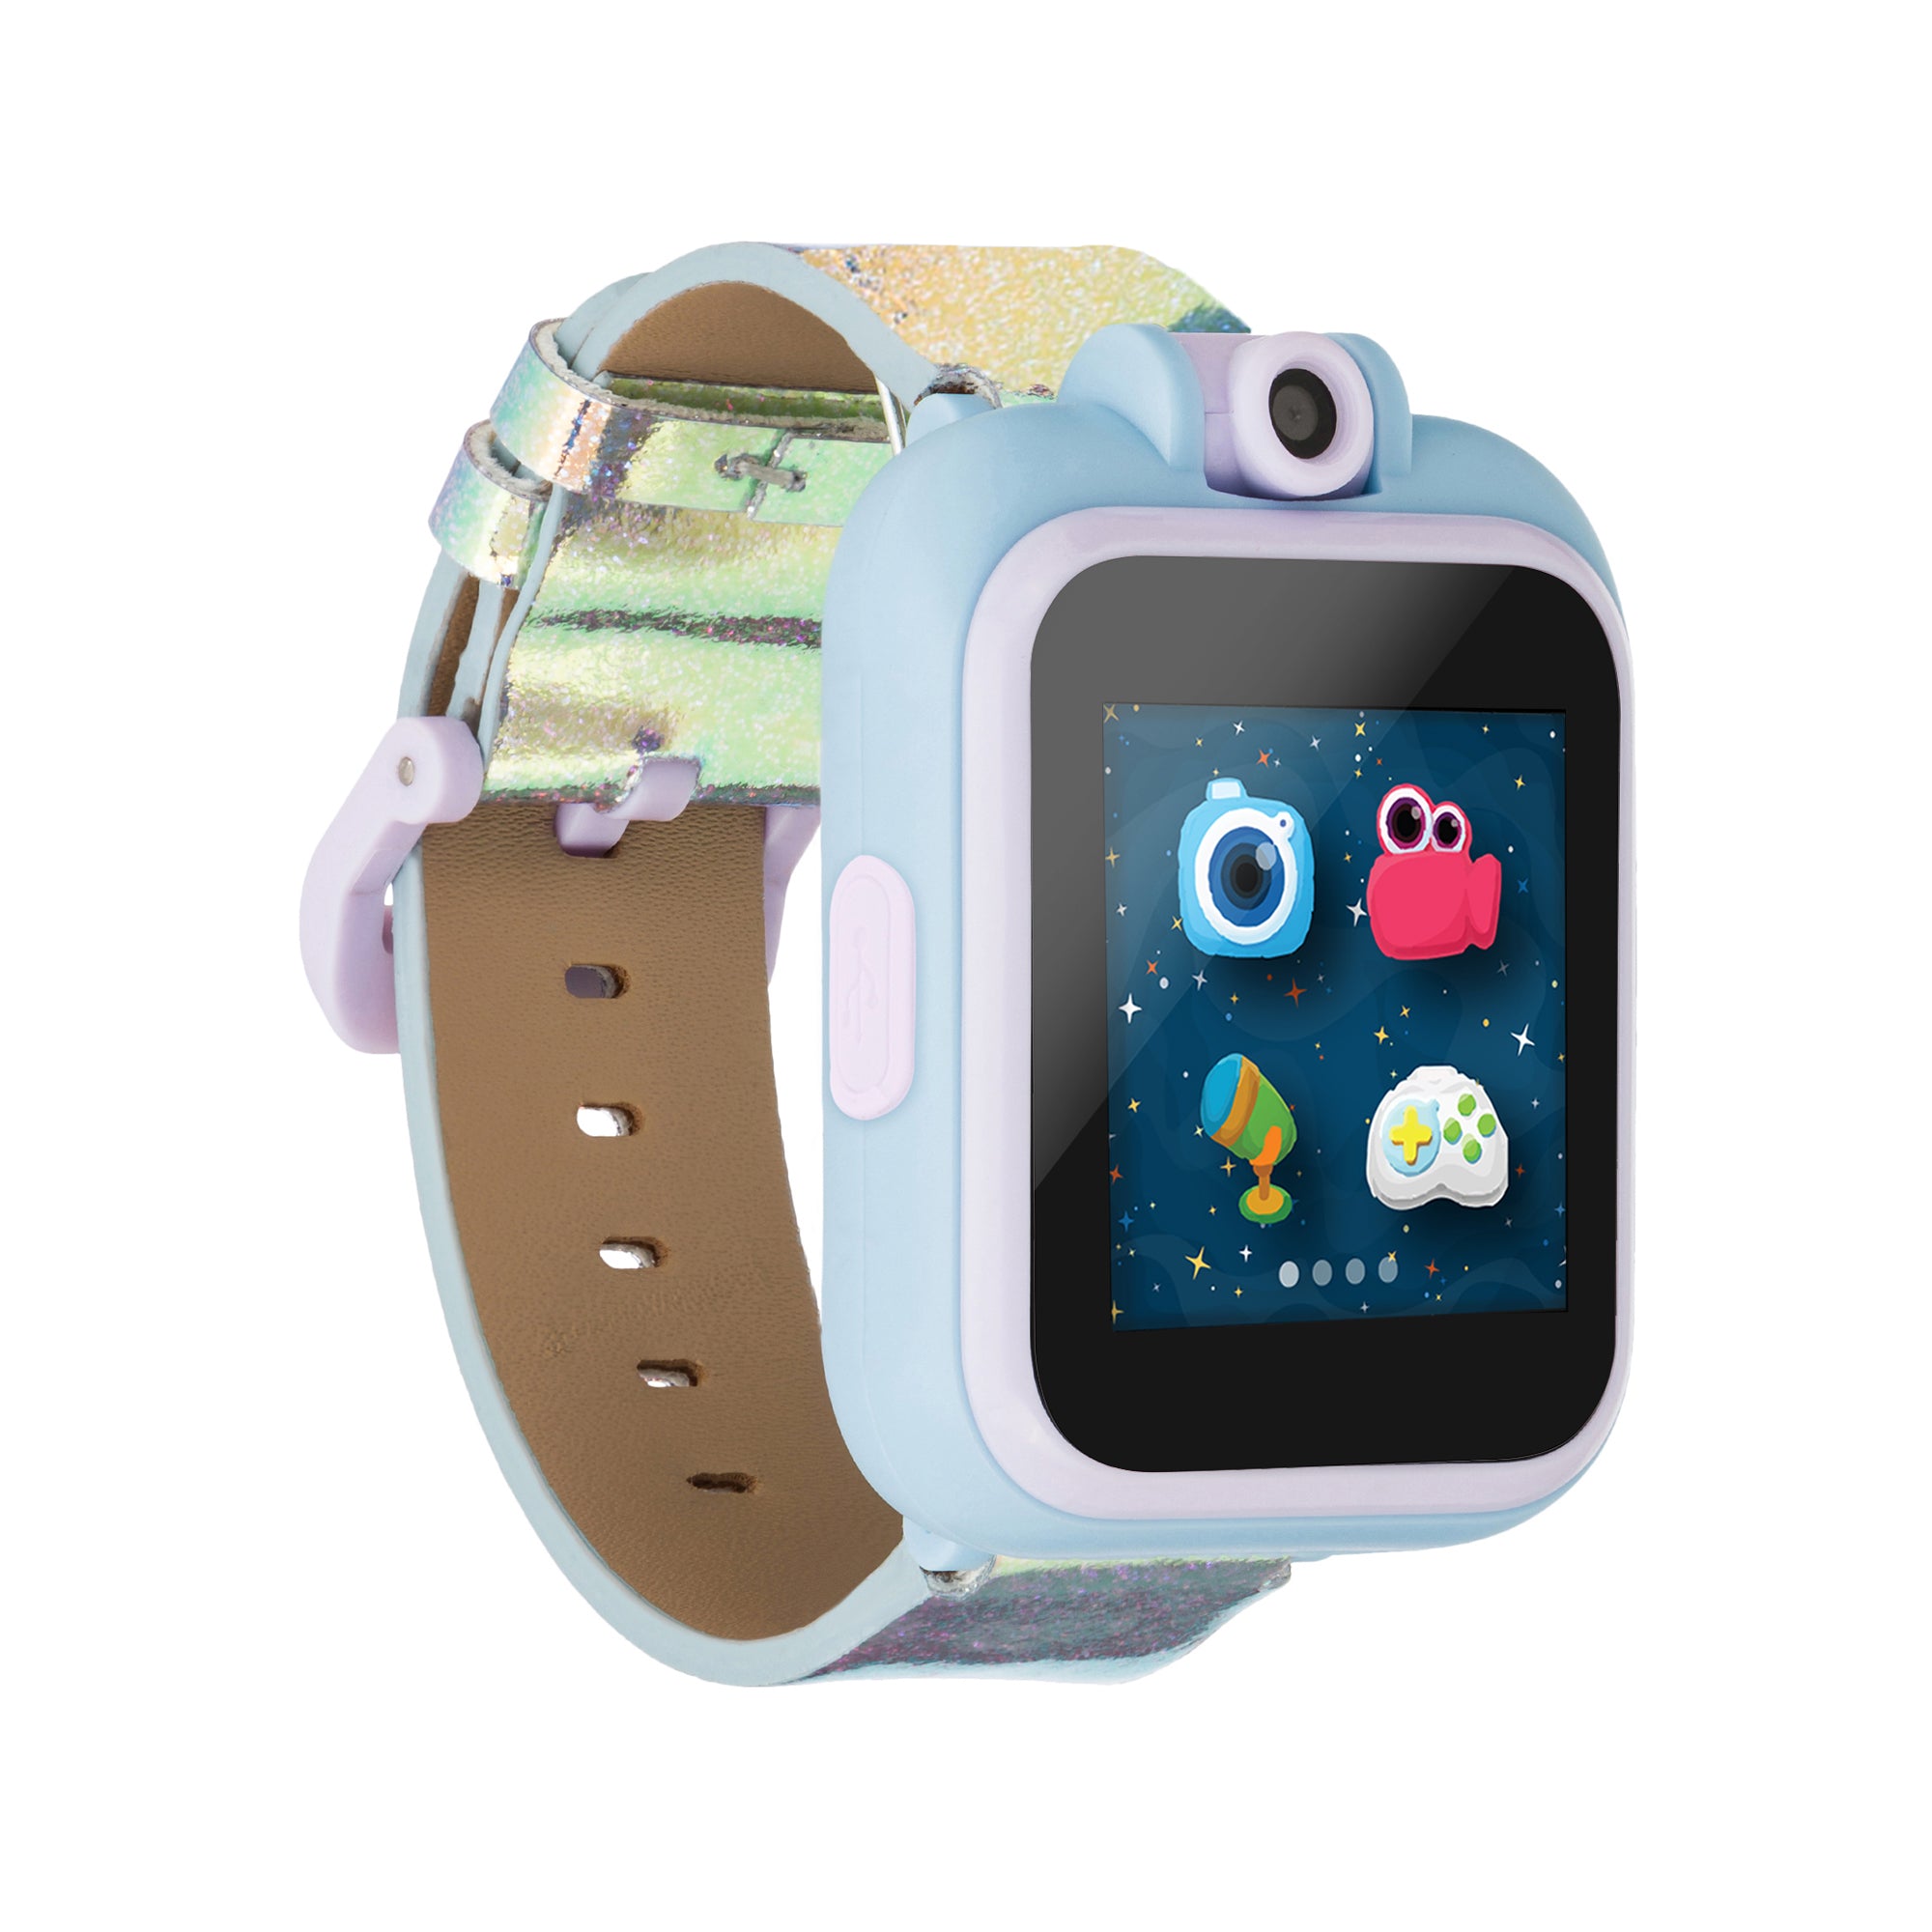 PlayZoom Smartwatch for Kids: Holographic affordable smart watch